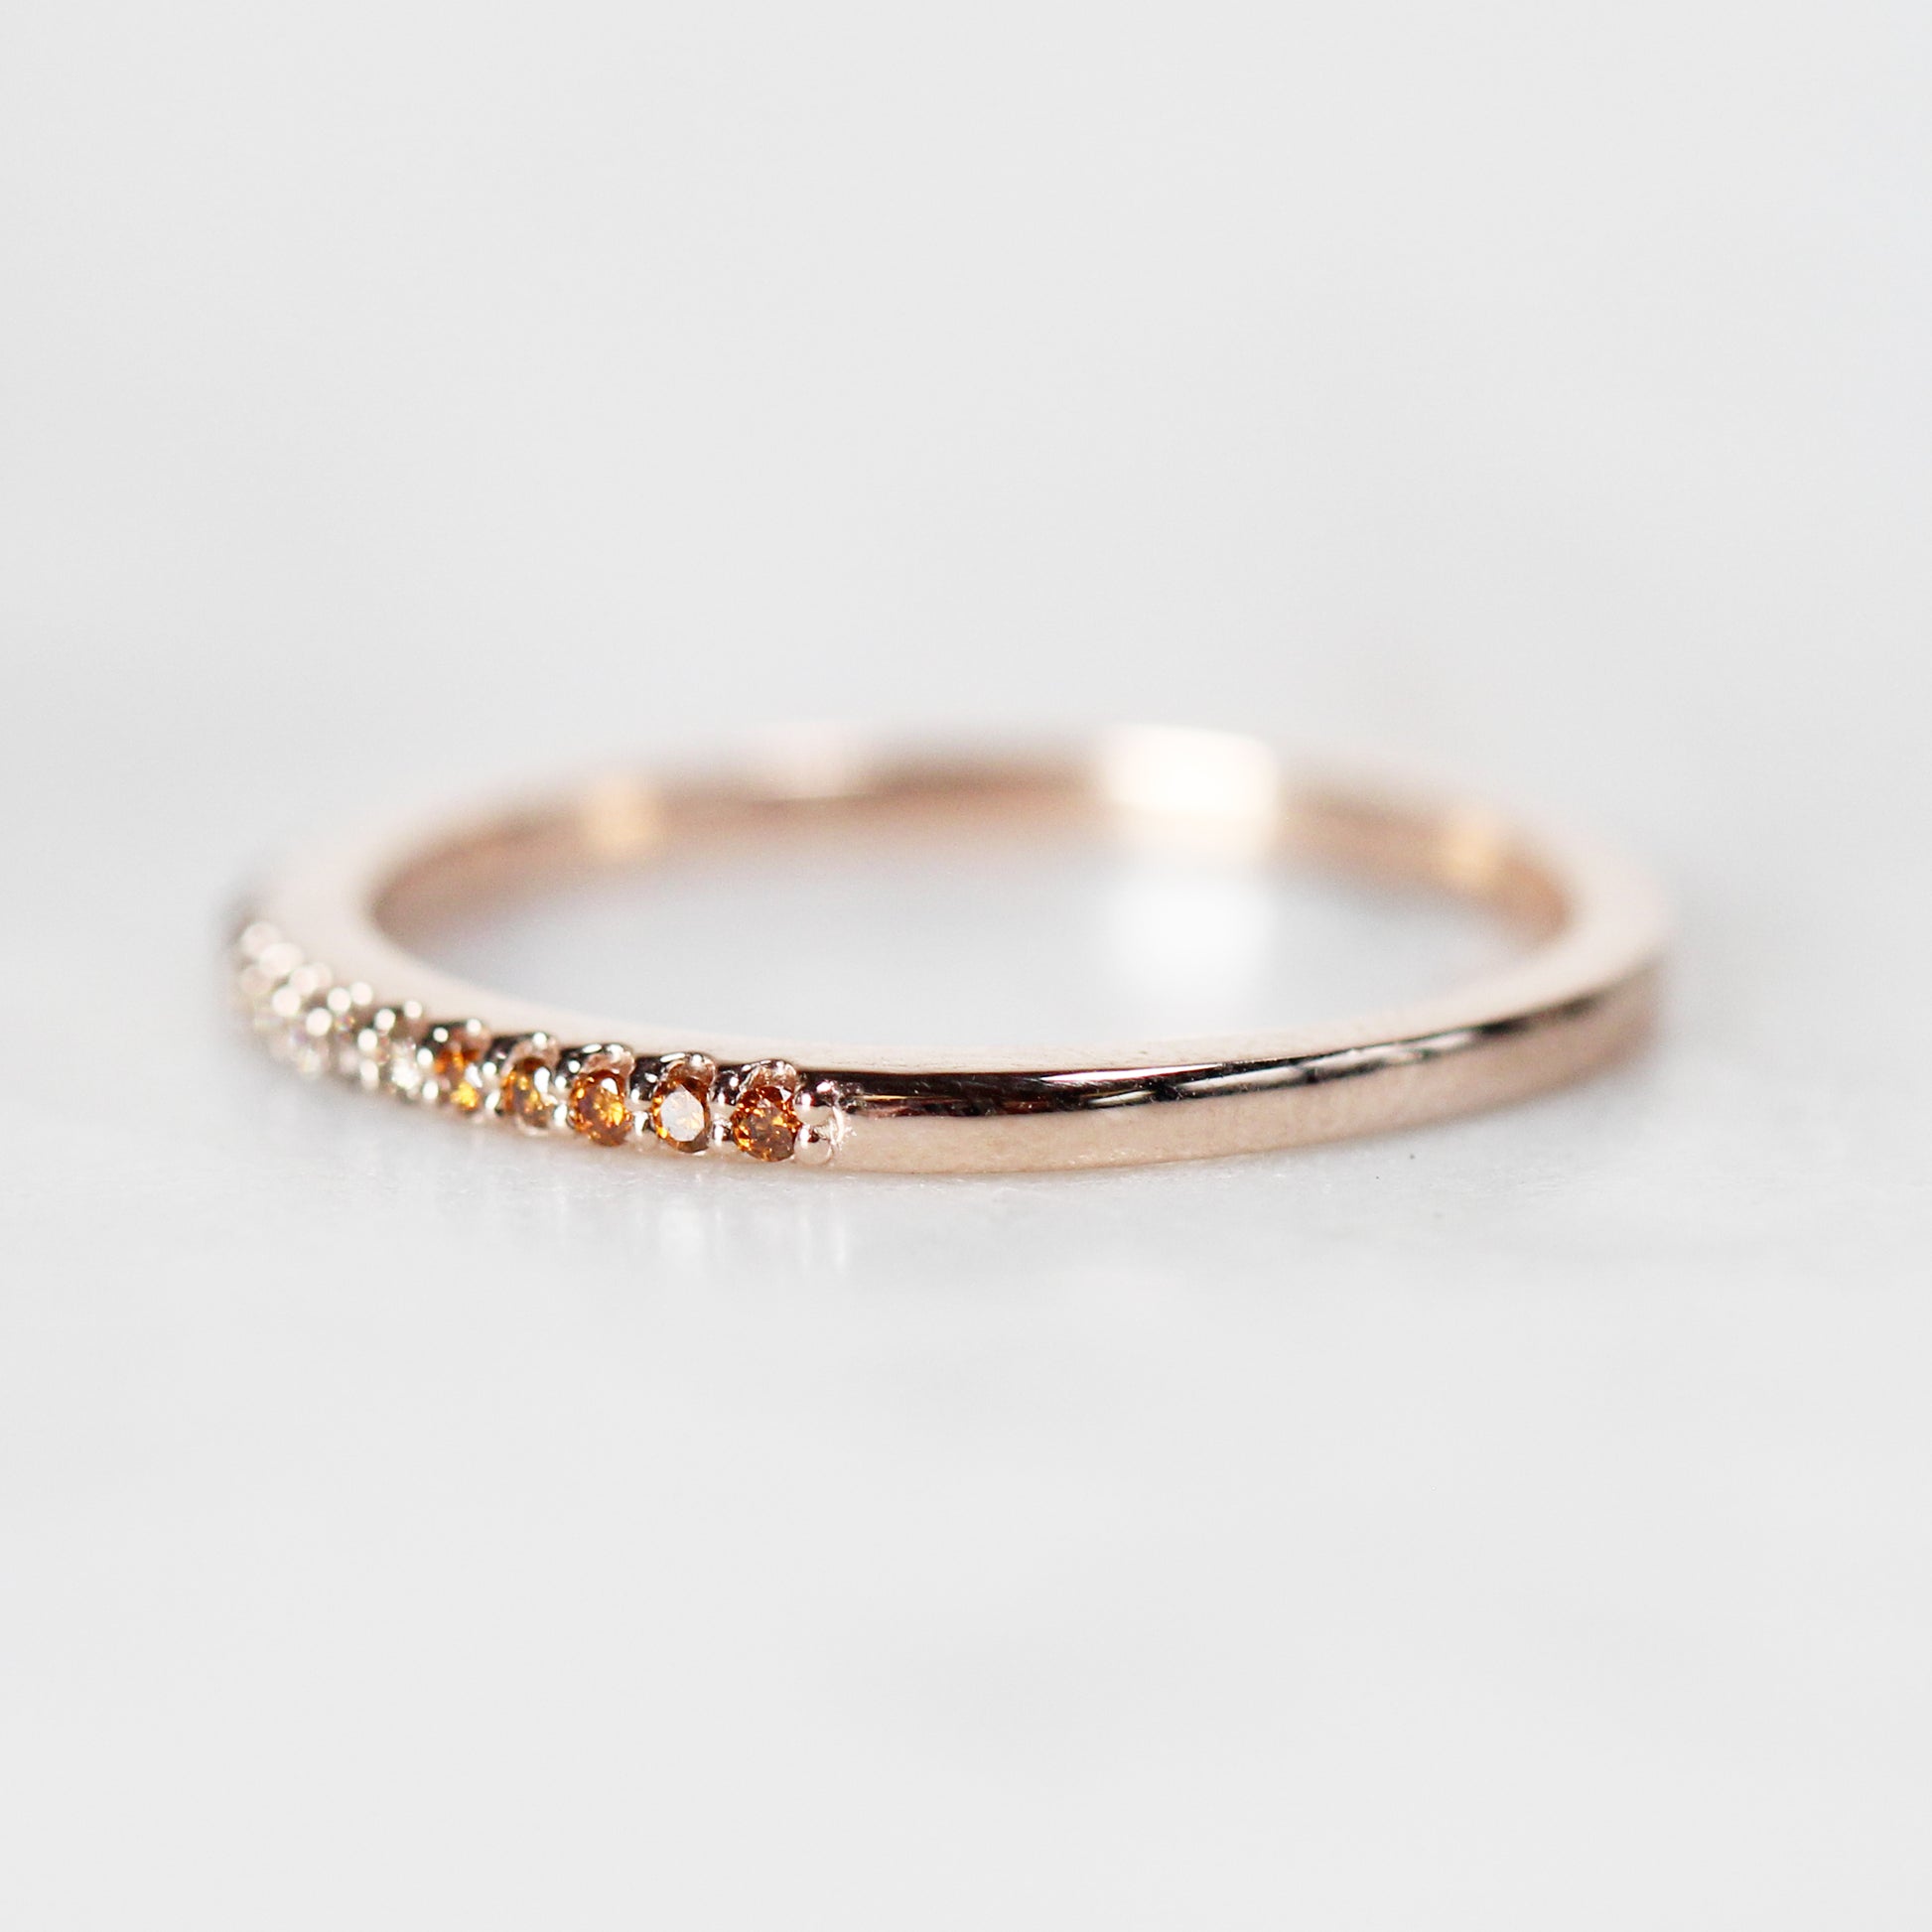 Constance - Pave set, minimal diamond wedding stacking band - Midwinter Co. Alternative Bridal Rings and Modern Fine Jewelry